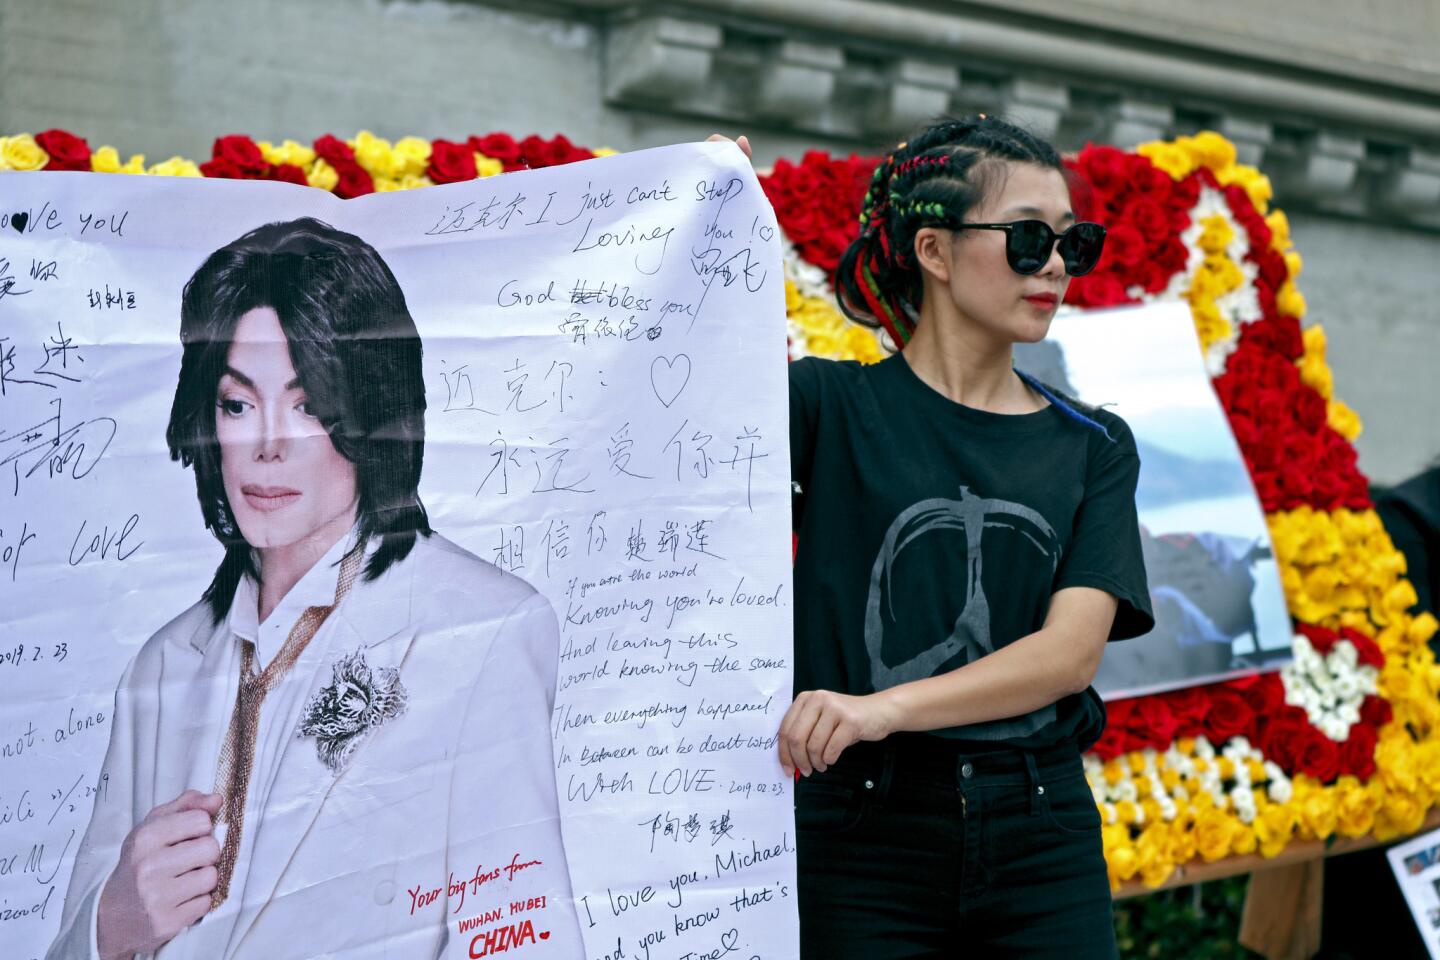 Photo Gallery: Fans gather at Michael Jackson's final resting place in Glendale on 10th anniversary of his death